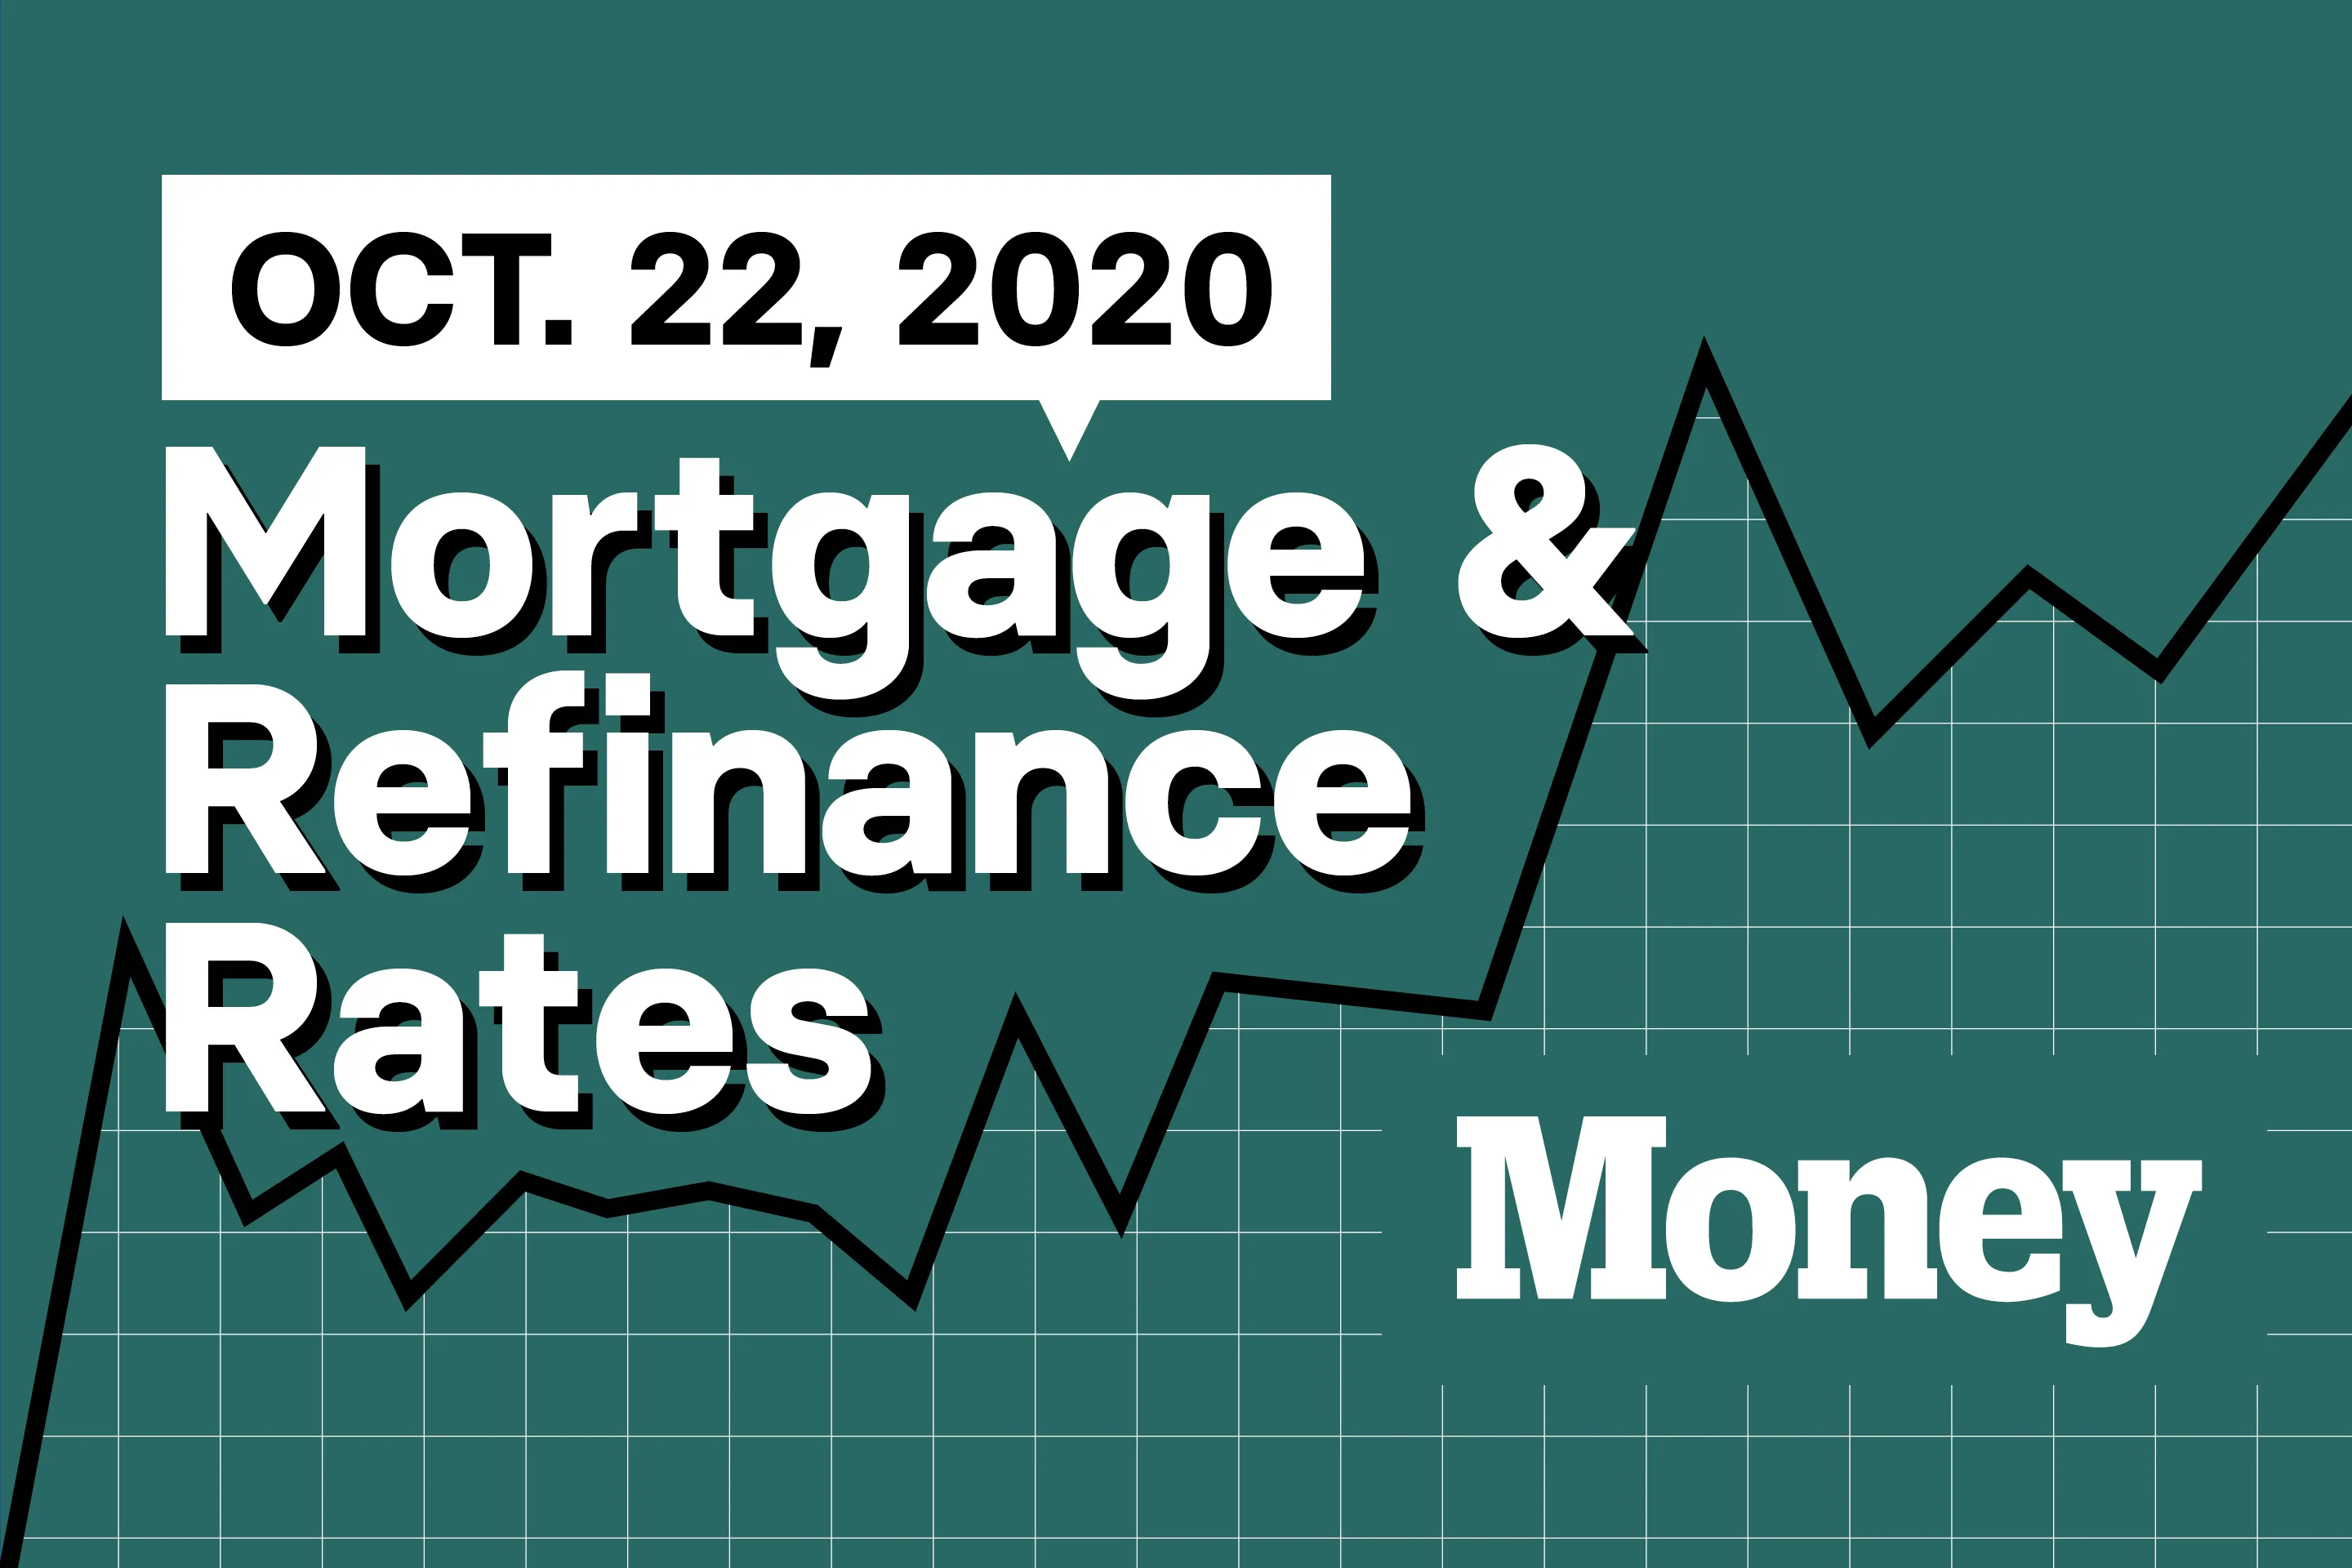 Here Are Today's Best Mortgage & Refinance Rates for October 22, 2020